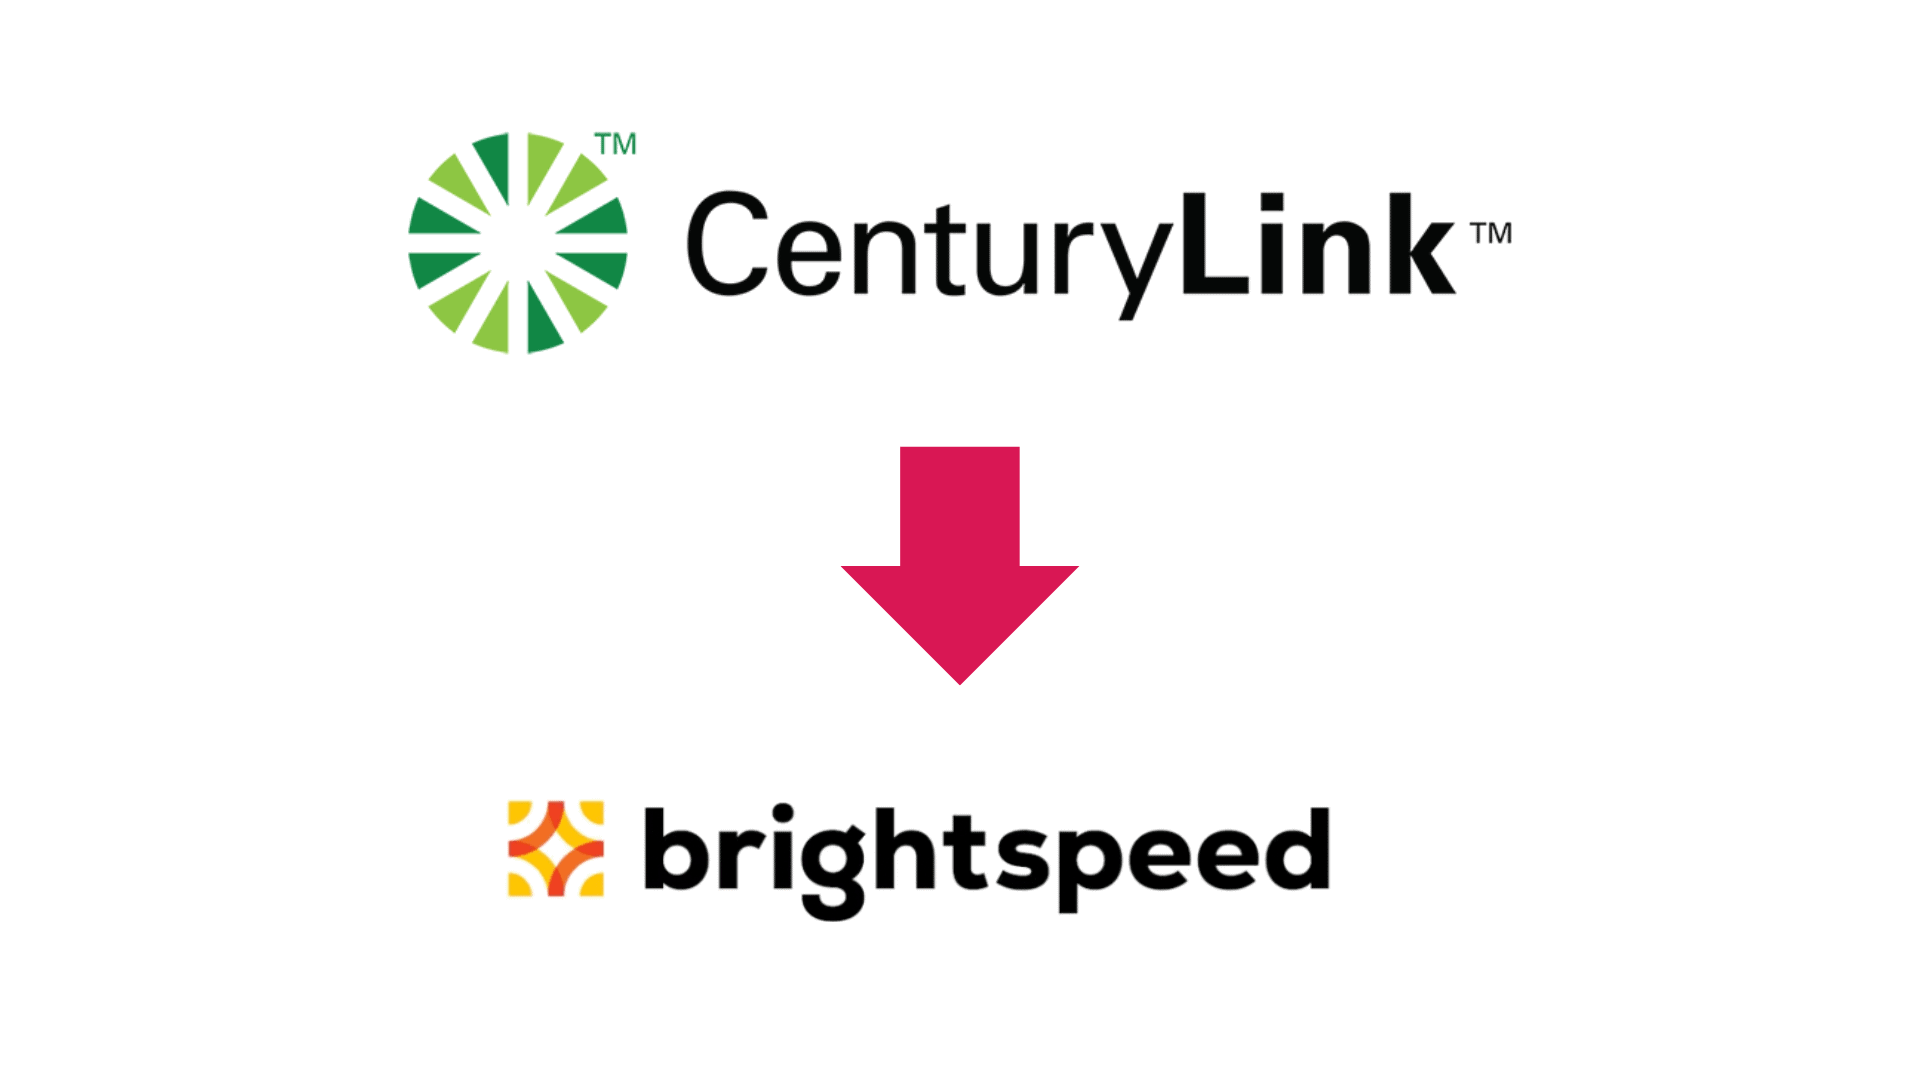 CenturyLink and Brightspeed logos with an arrow going from CenturyLink to Brightspeed 